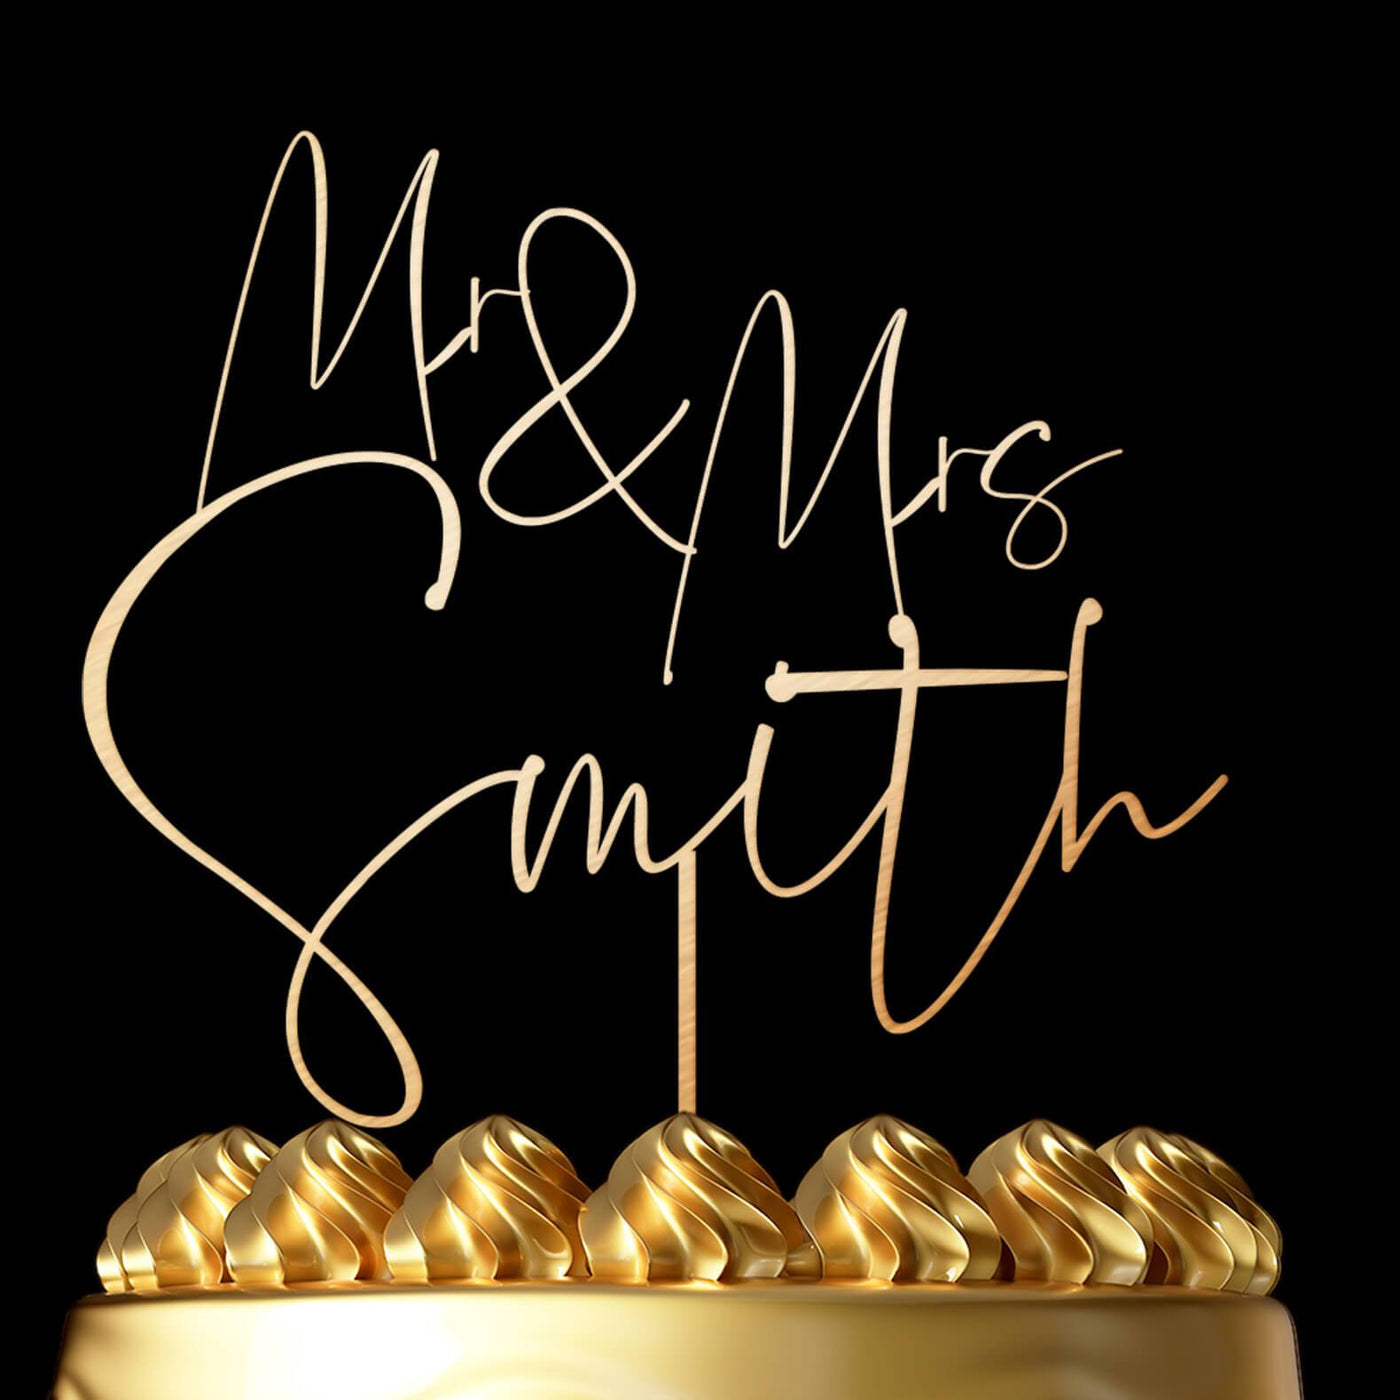 Celebrate Your Love with Personalized Wedding Cake Toppers - Custom Mr & Mrs Surname Toppers